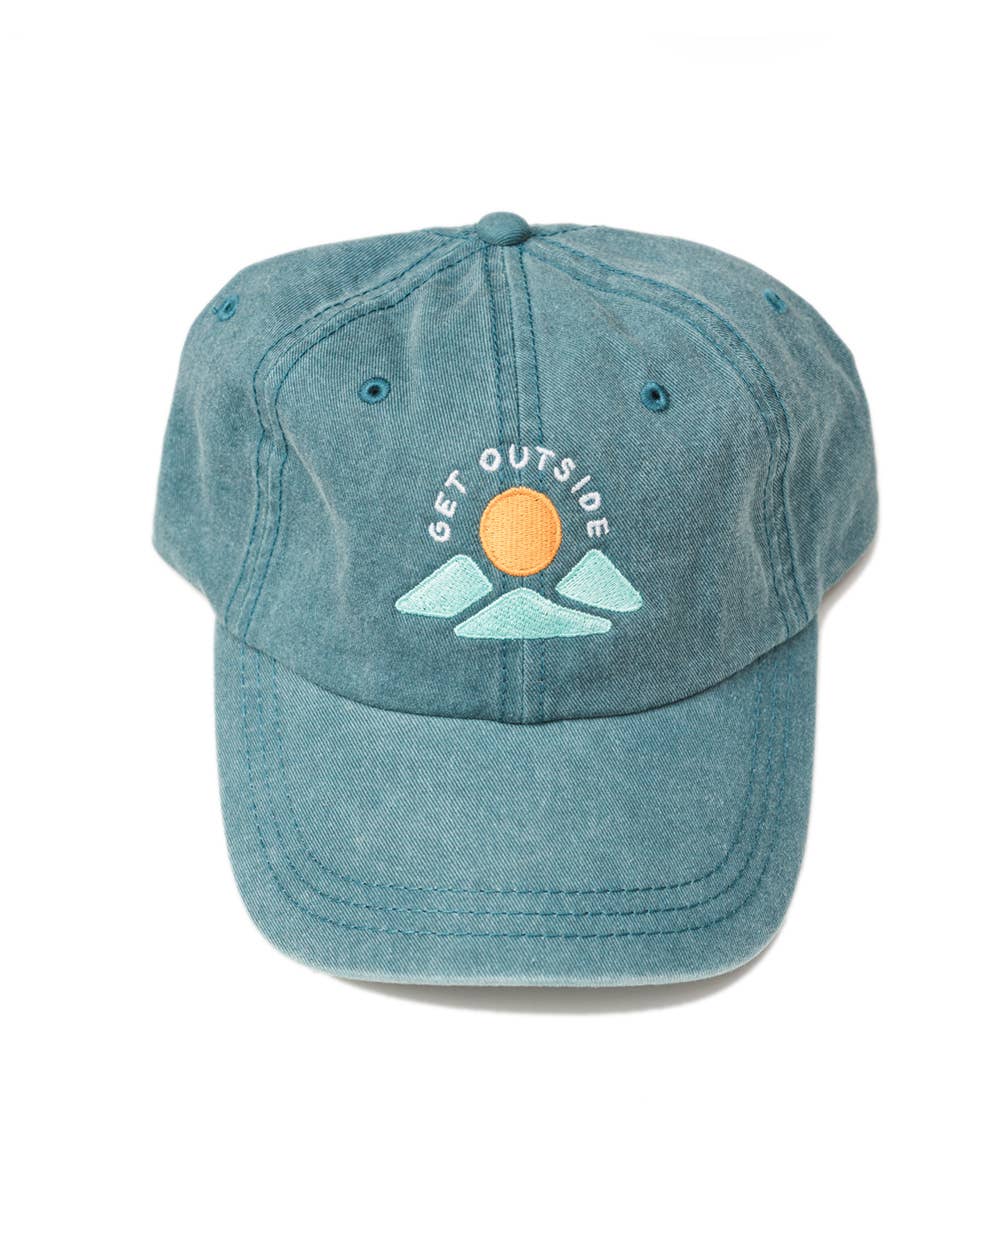 Get Outside dad hat by Keep Nature Wild